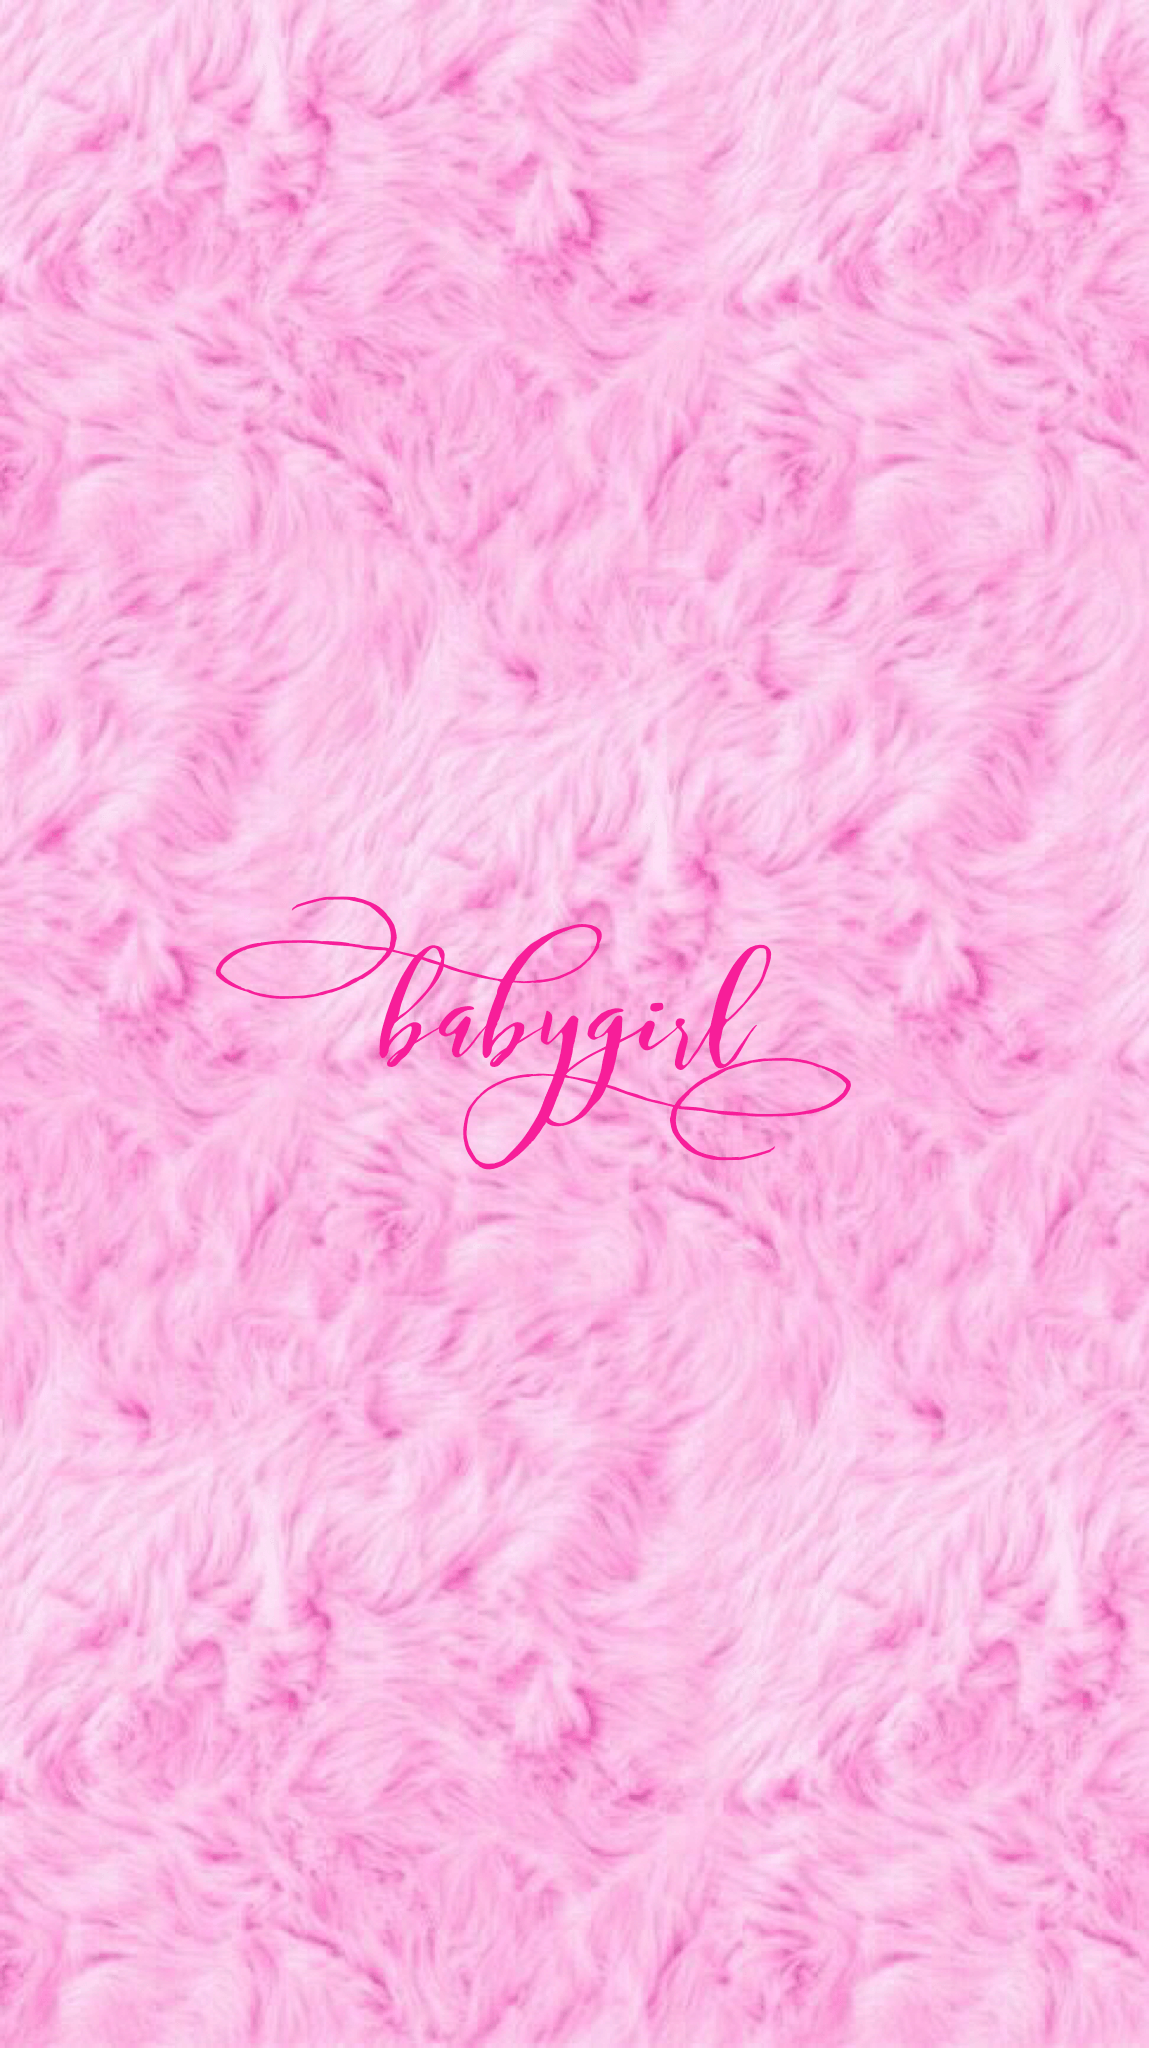 Pink Babygirl iPhone Mobile Wallpapers @Evaland Edits